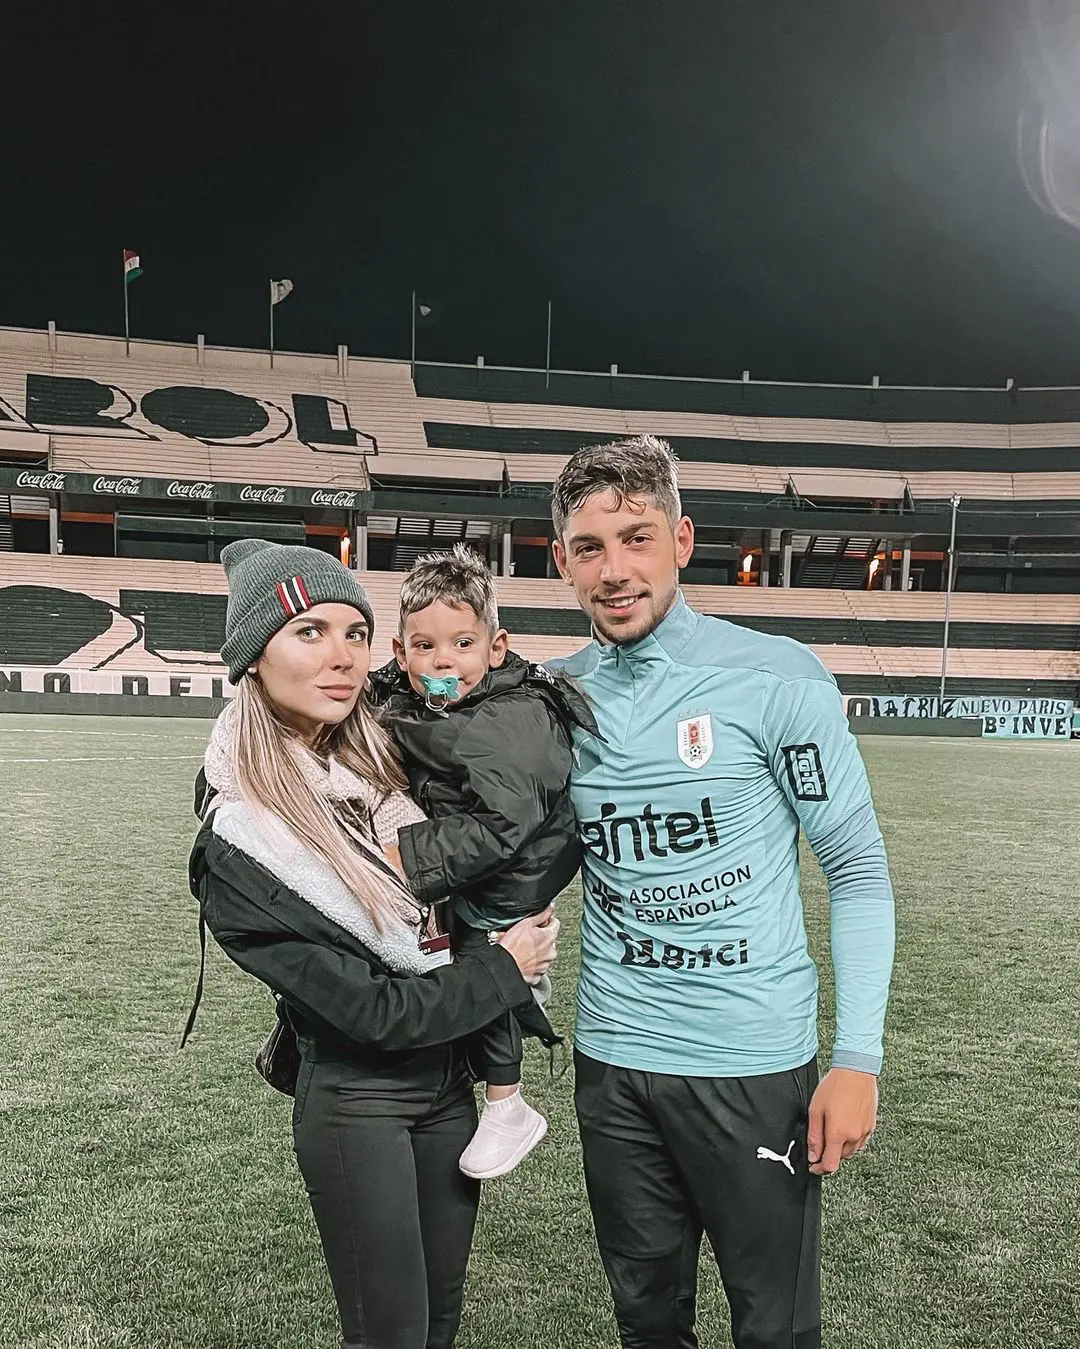 Mina and her son Benicio went to see Fede's match and clicked some pictures together after the match finished.